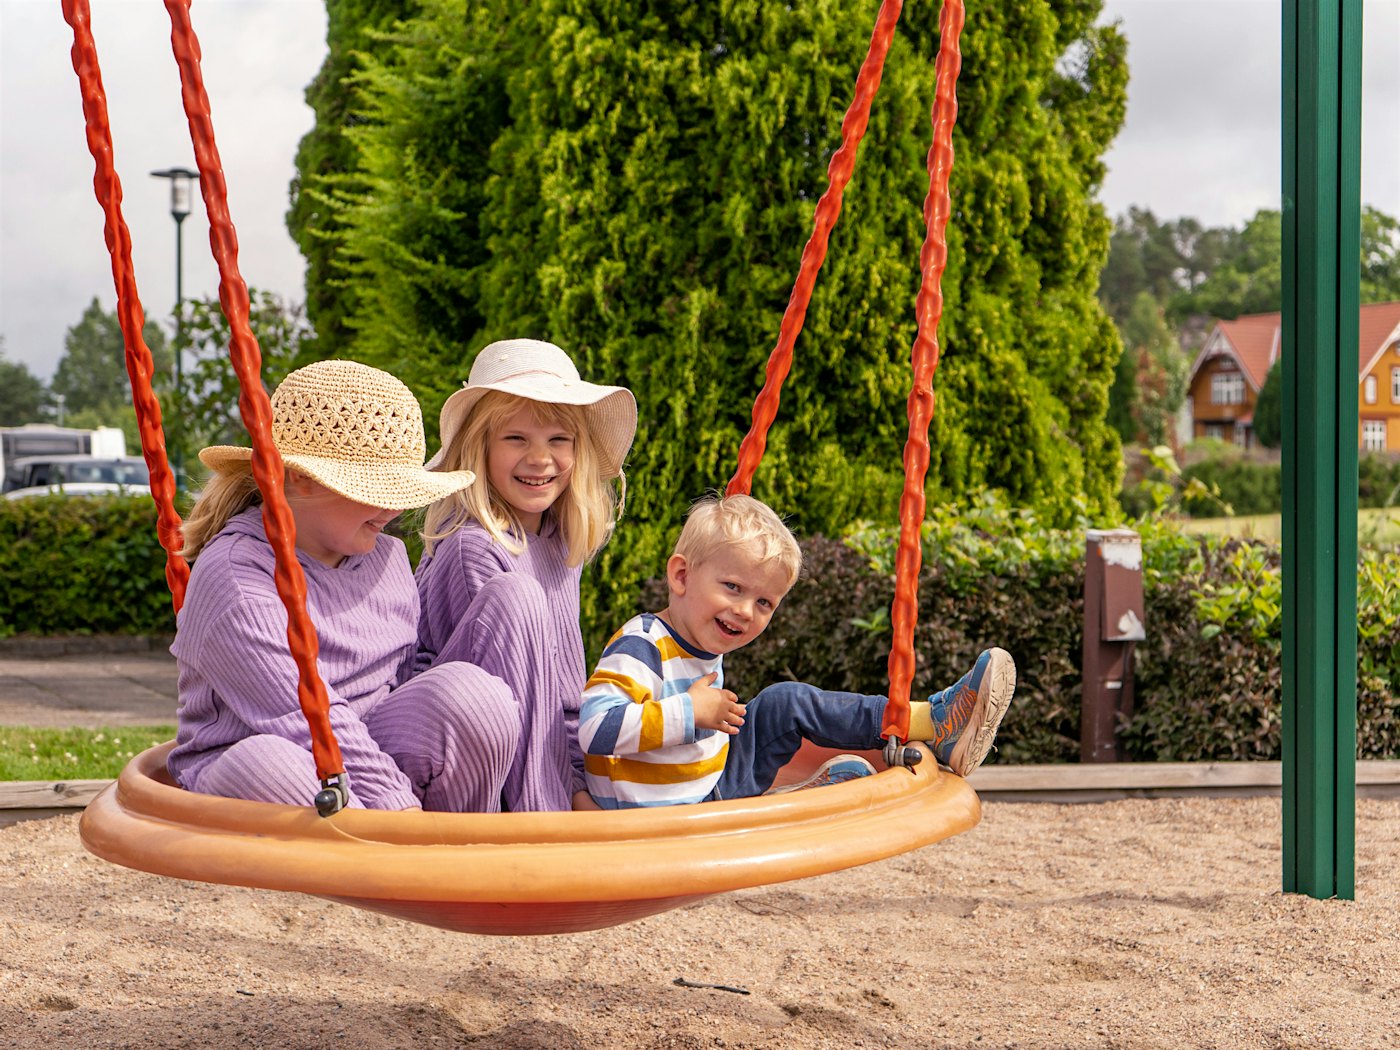 Two girls in matching outfits and their little brother sit together in a large swing on the playground. Photo